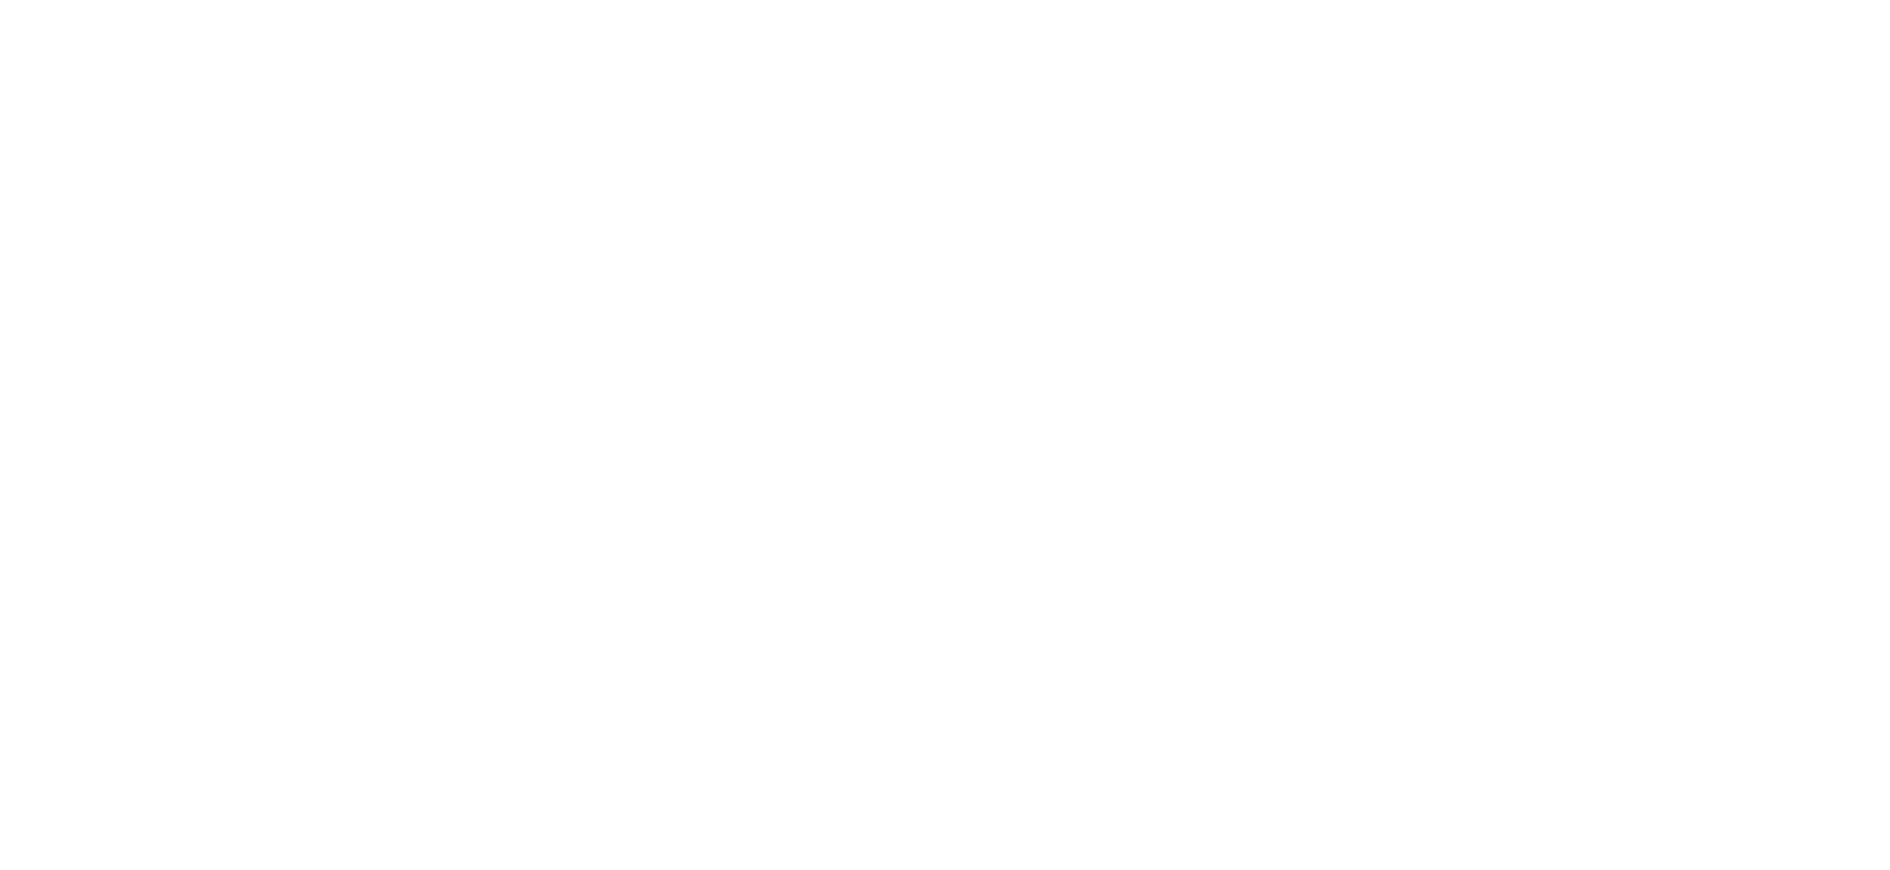 Happy Hour Specials All Day Mondays   Tuesday - Friday  3pm to 6pm